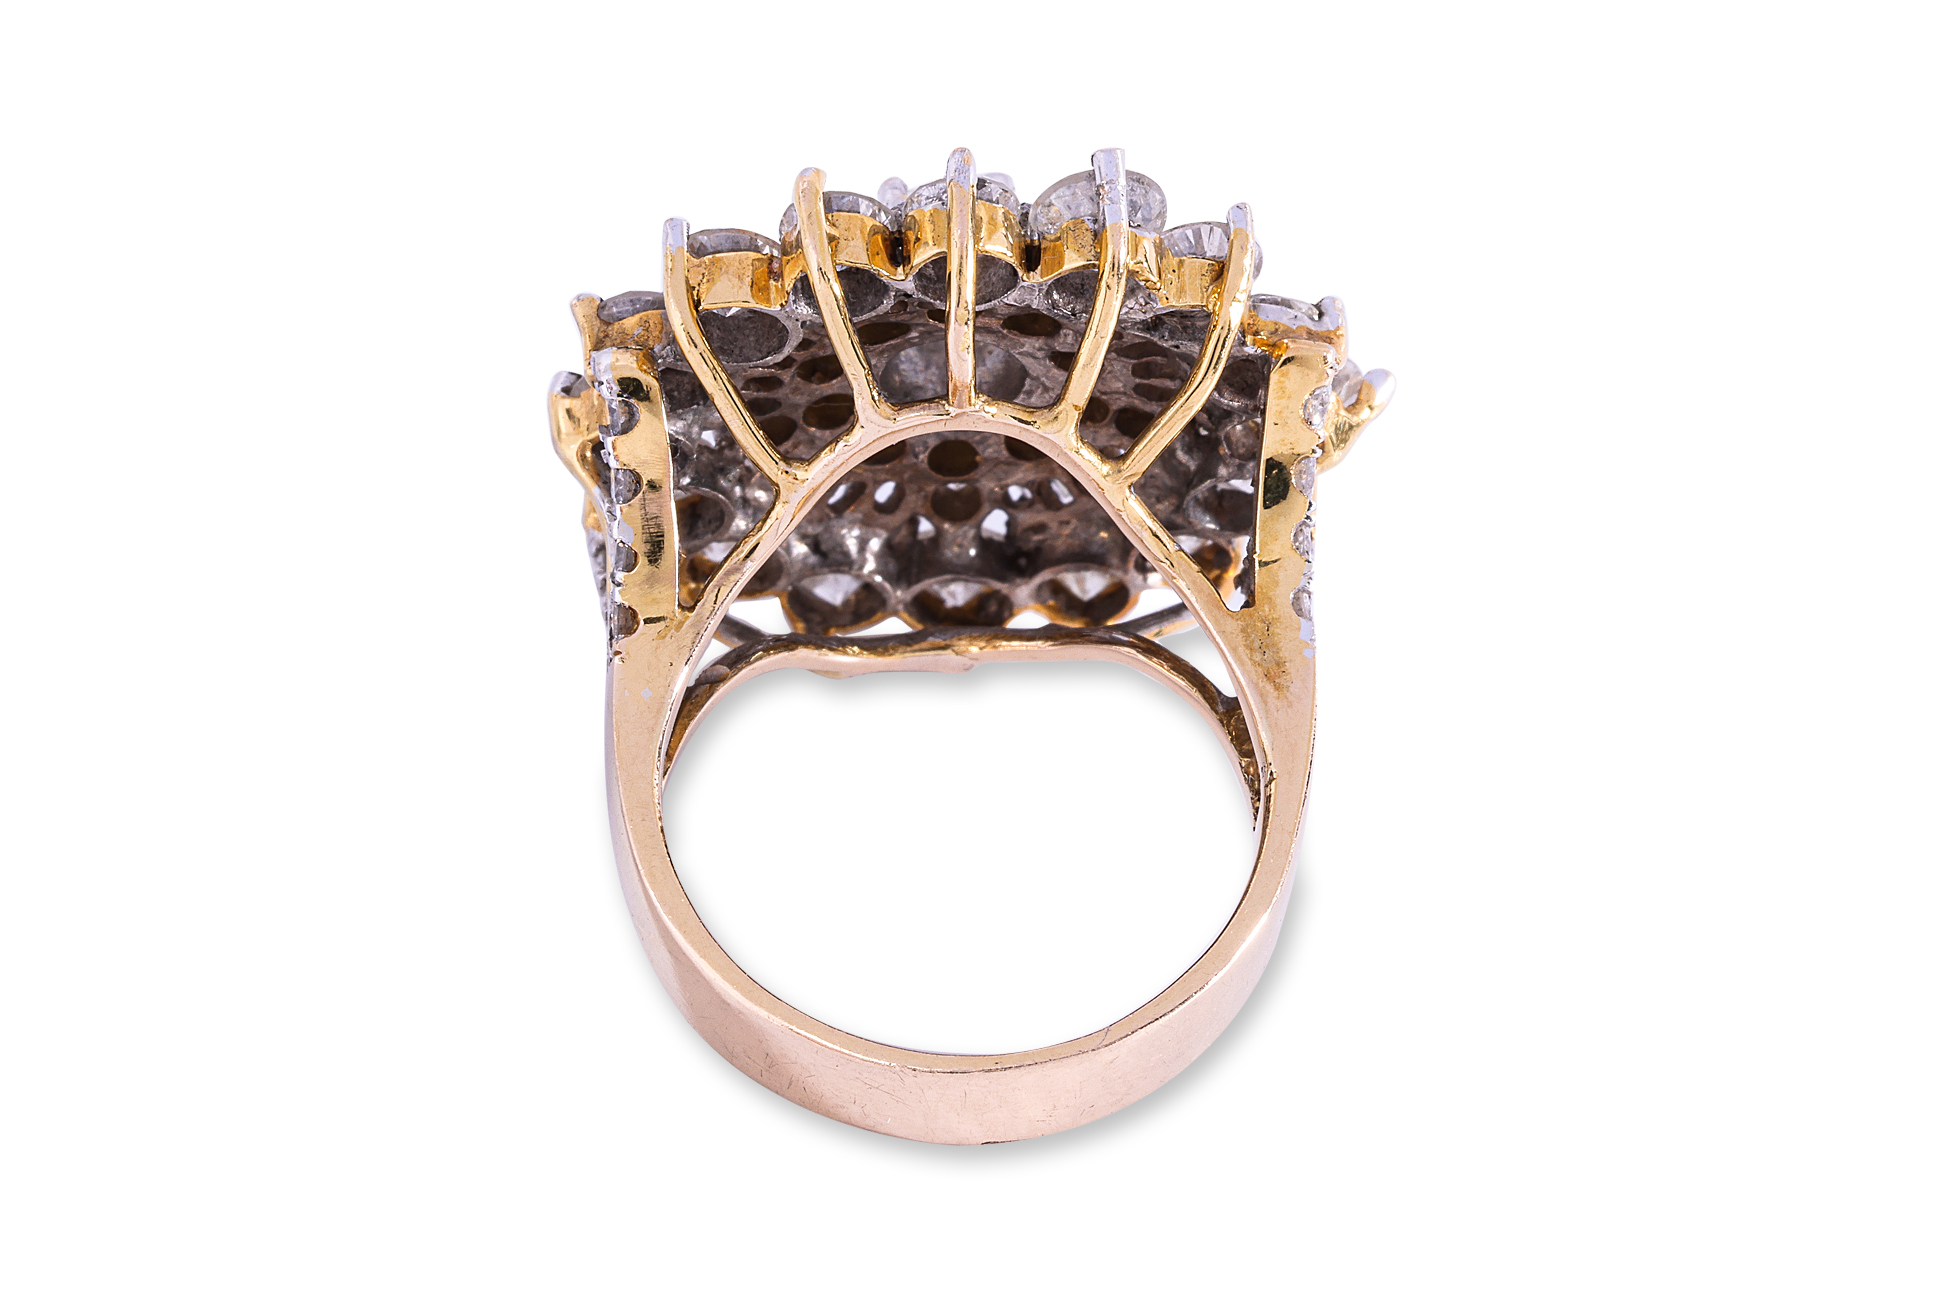 A DIAMOND 'FLOWER' CLUSTER RING - Image 3 of 4